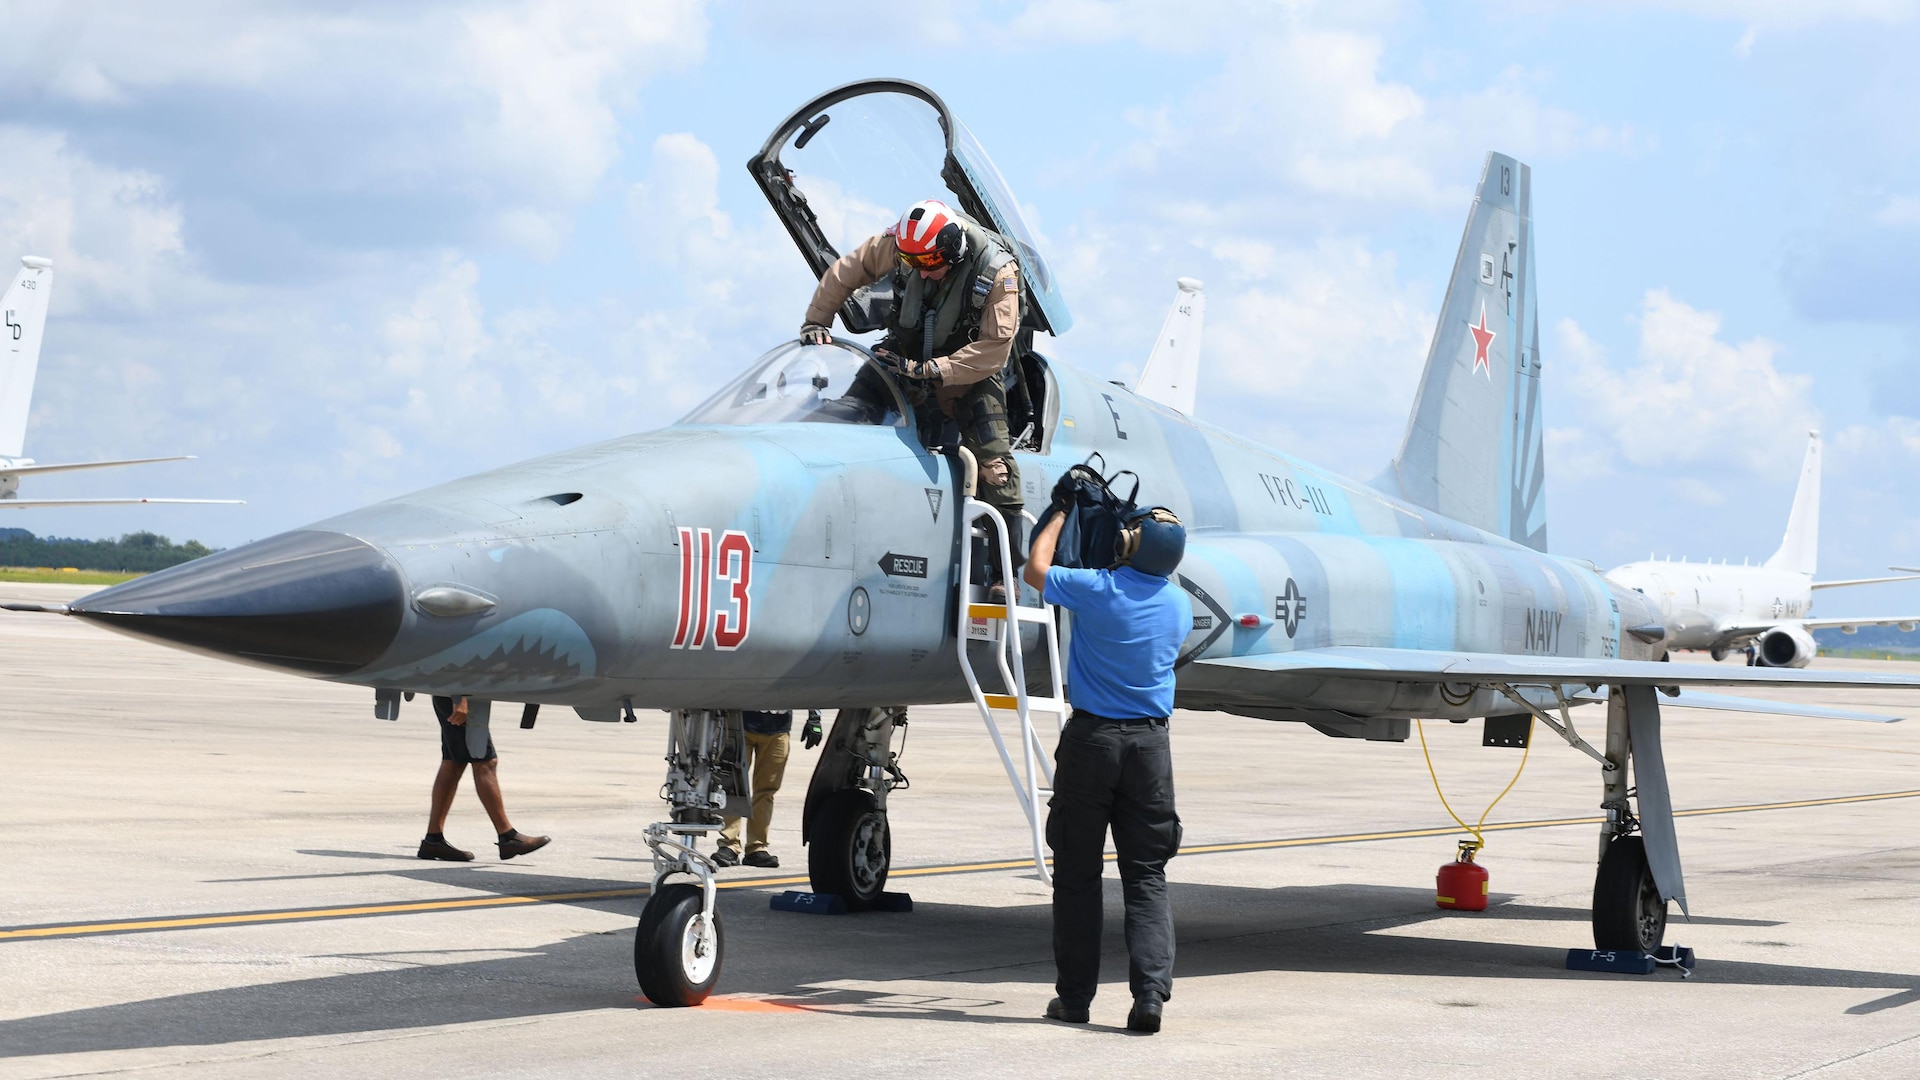 A pilot is assisted in exiting a small fighter jet